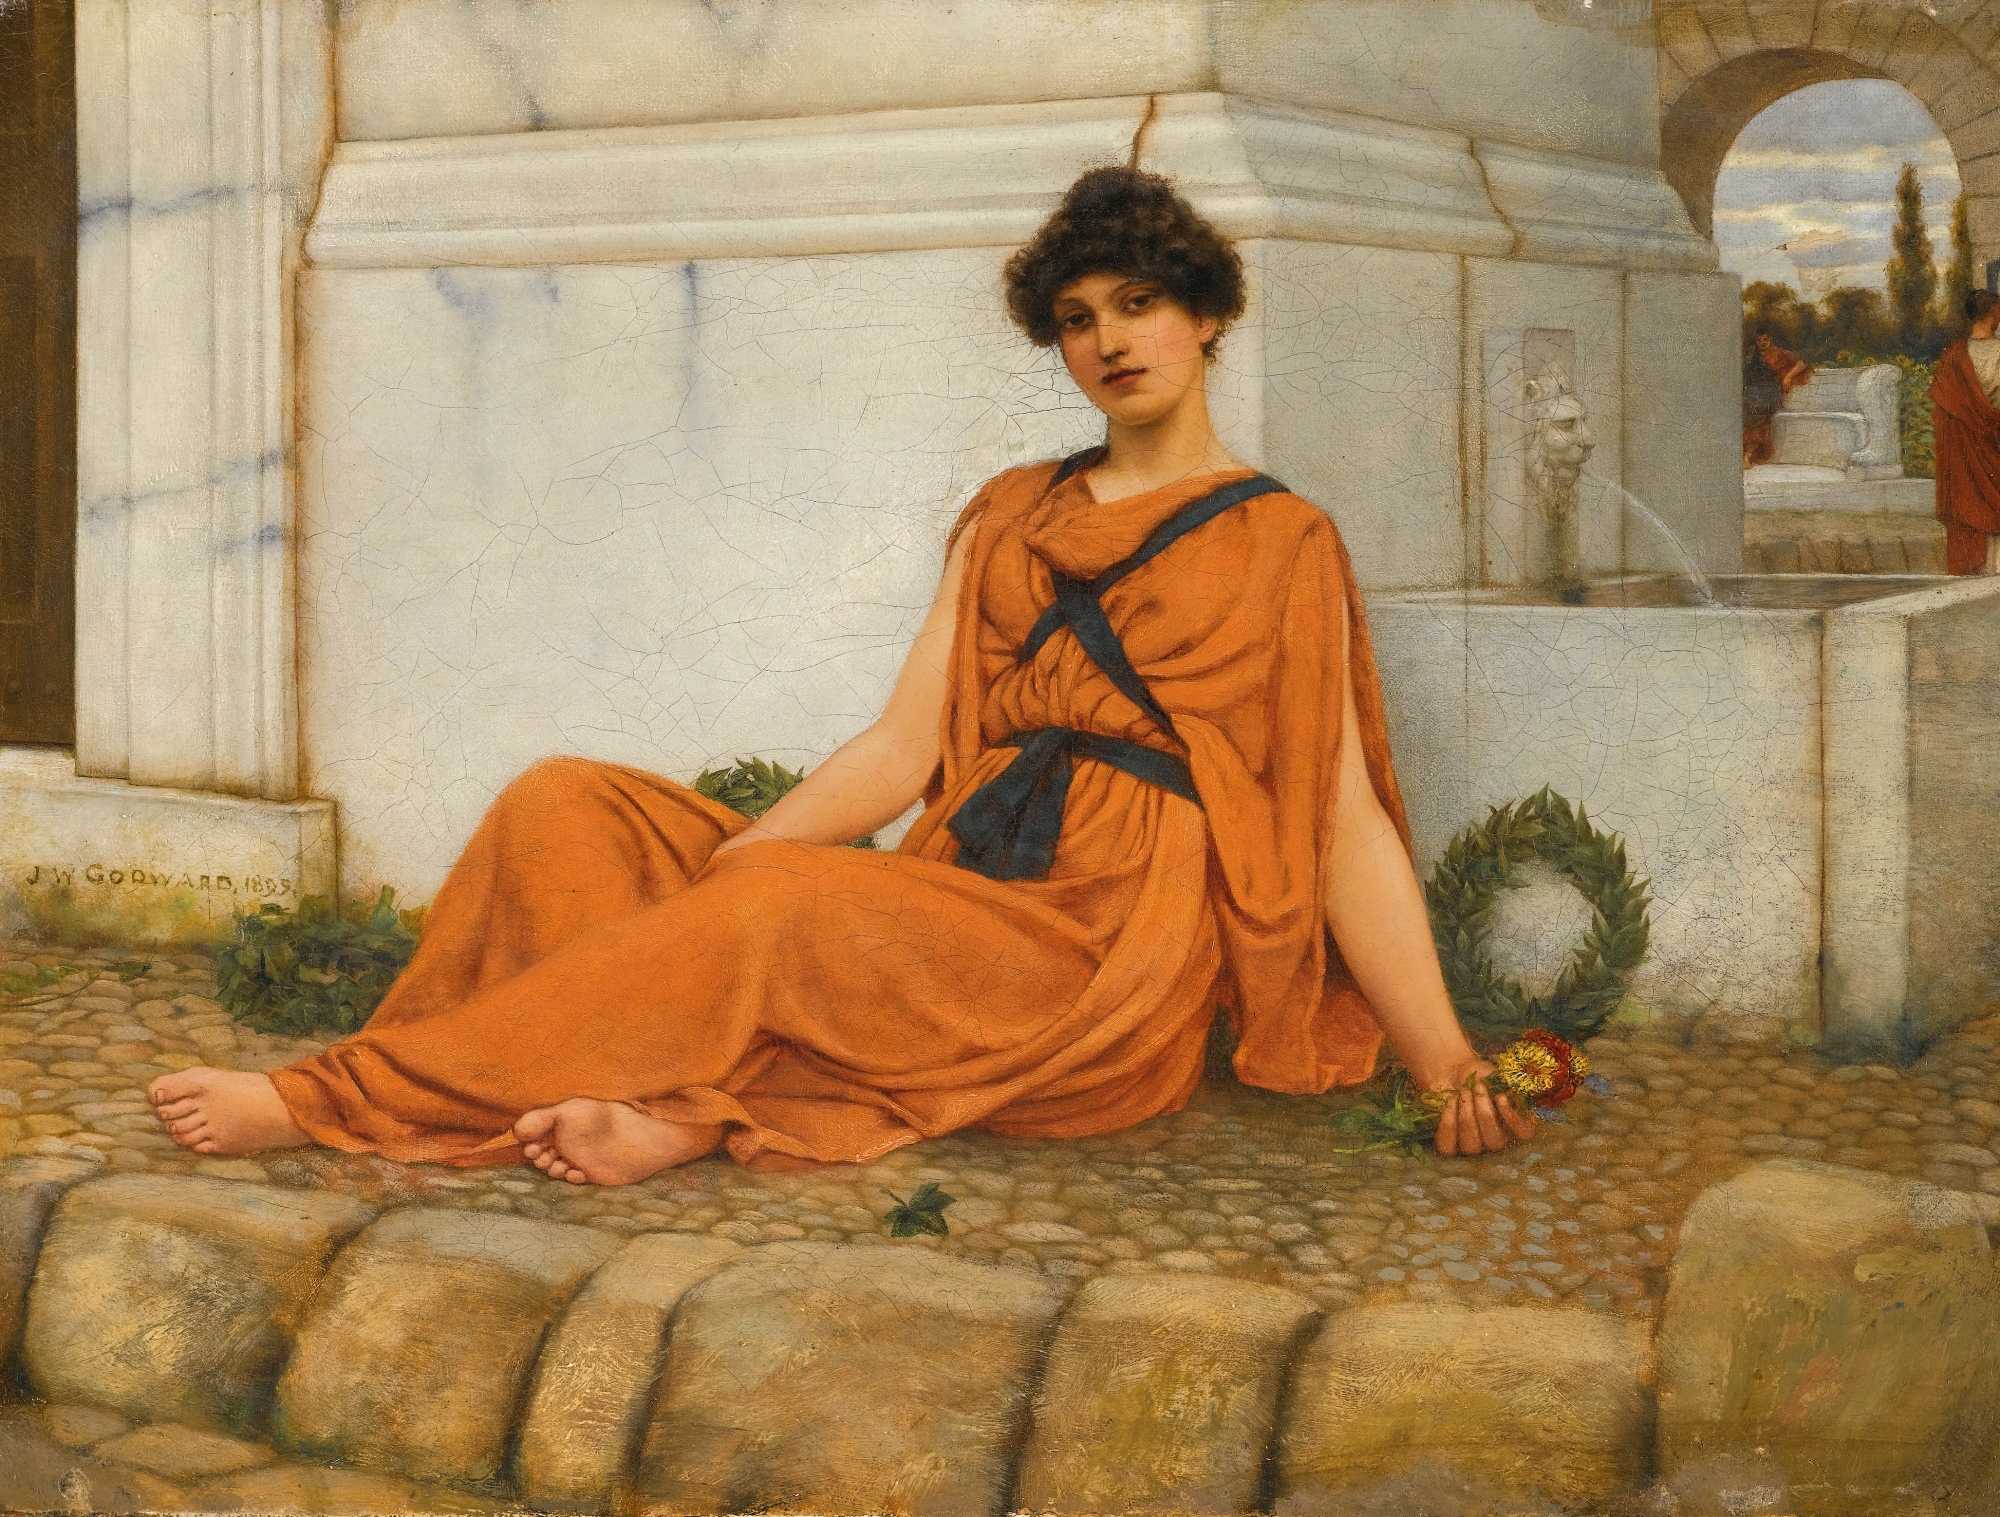 Find out more about John William Godward - Repose,The Flower Girl